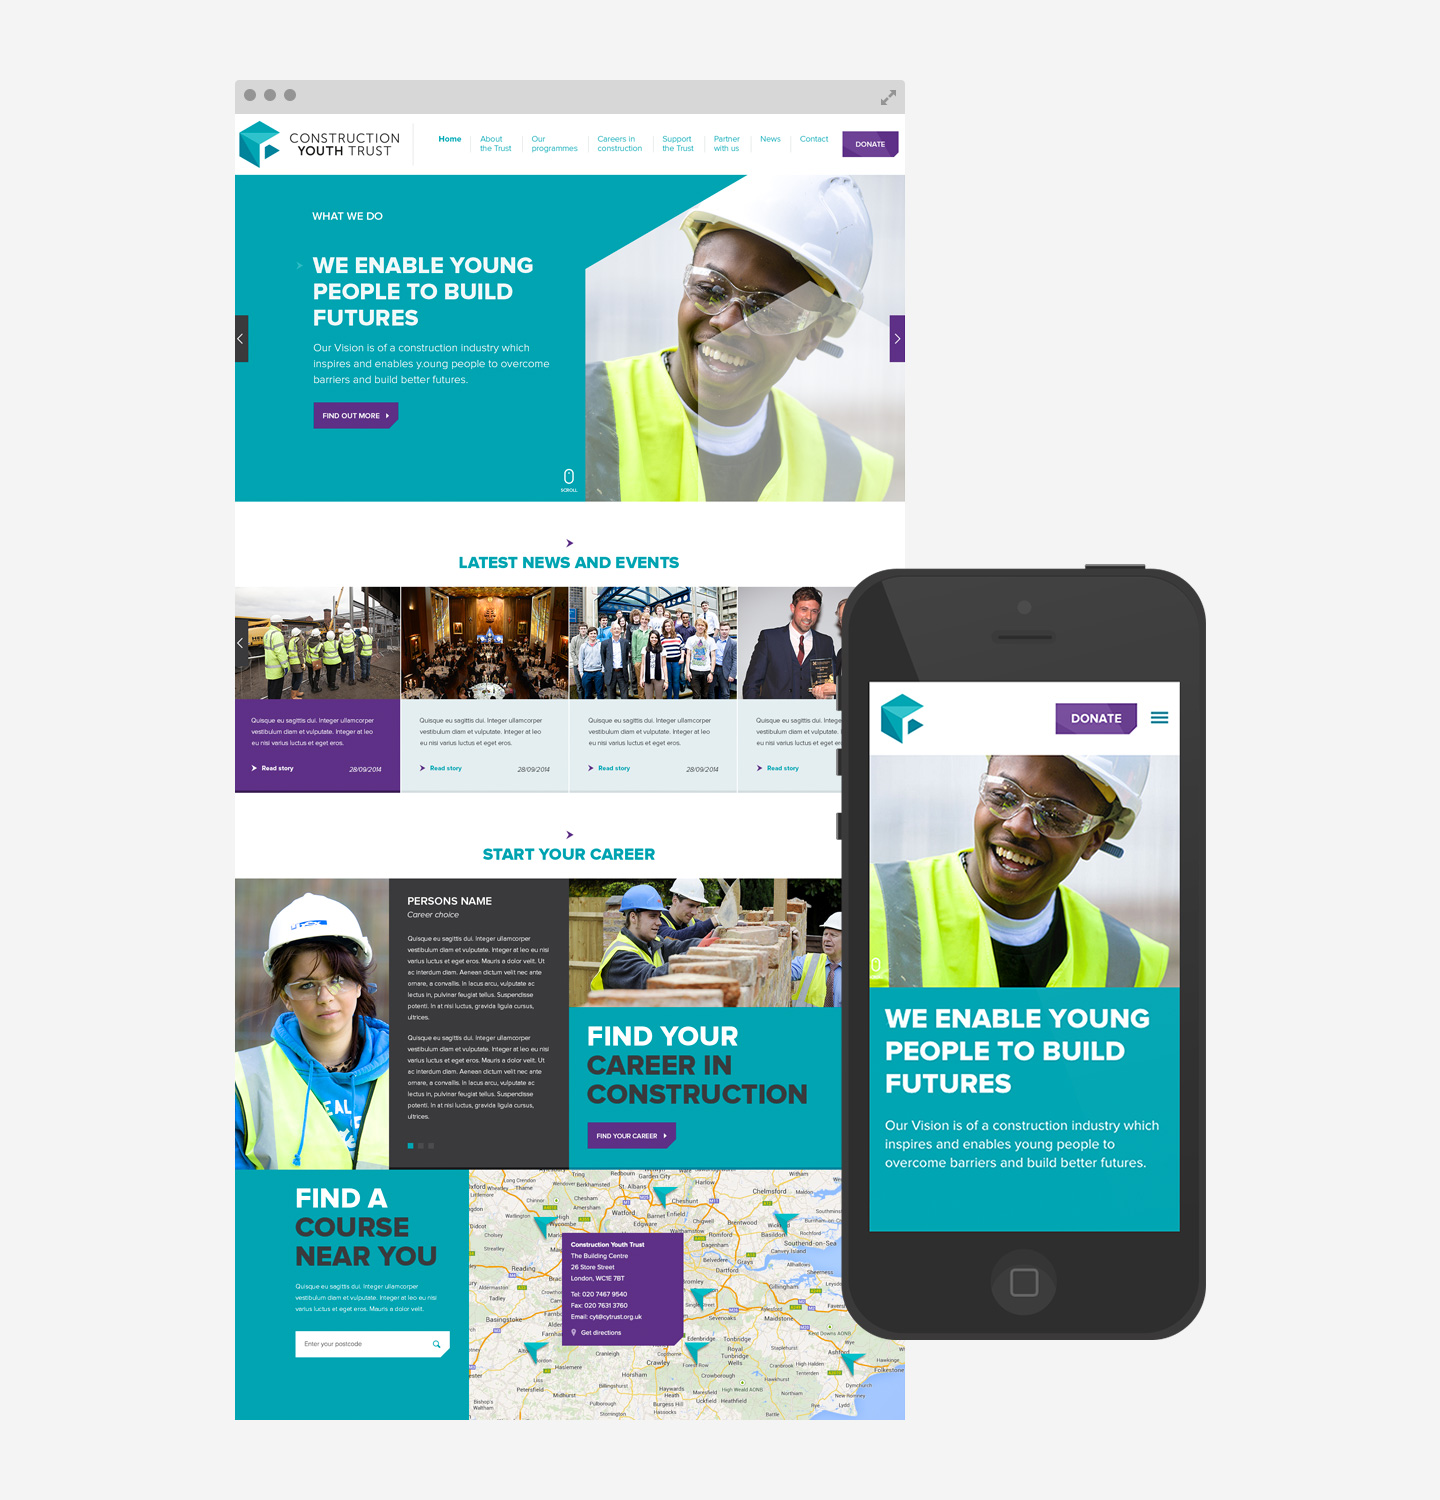 CONSTRUCTION YOUTH TRUST, brand refresh, website